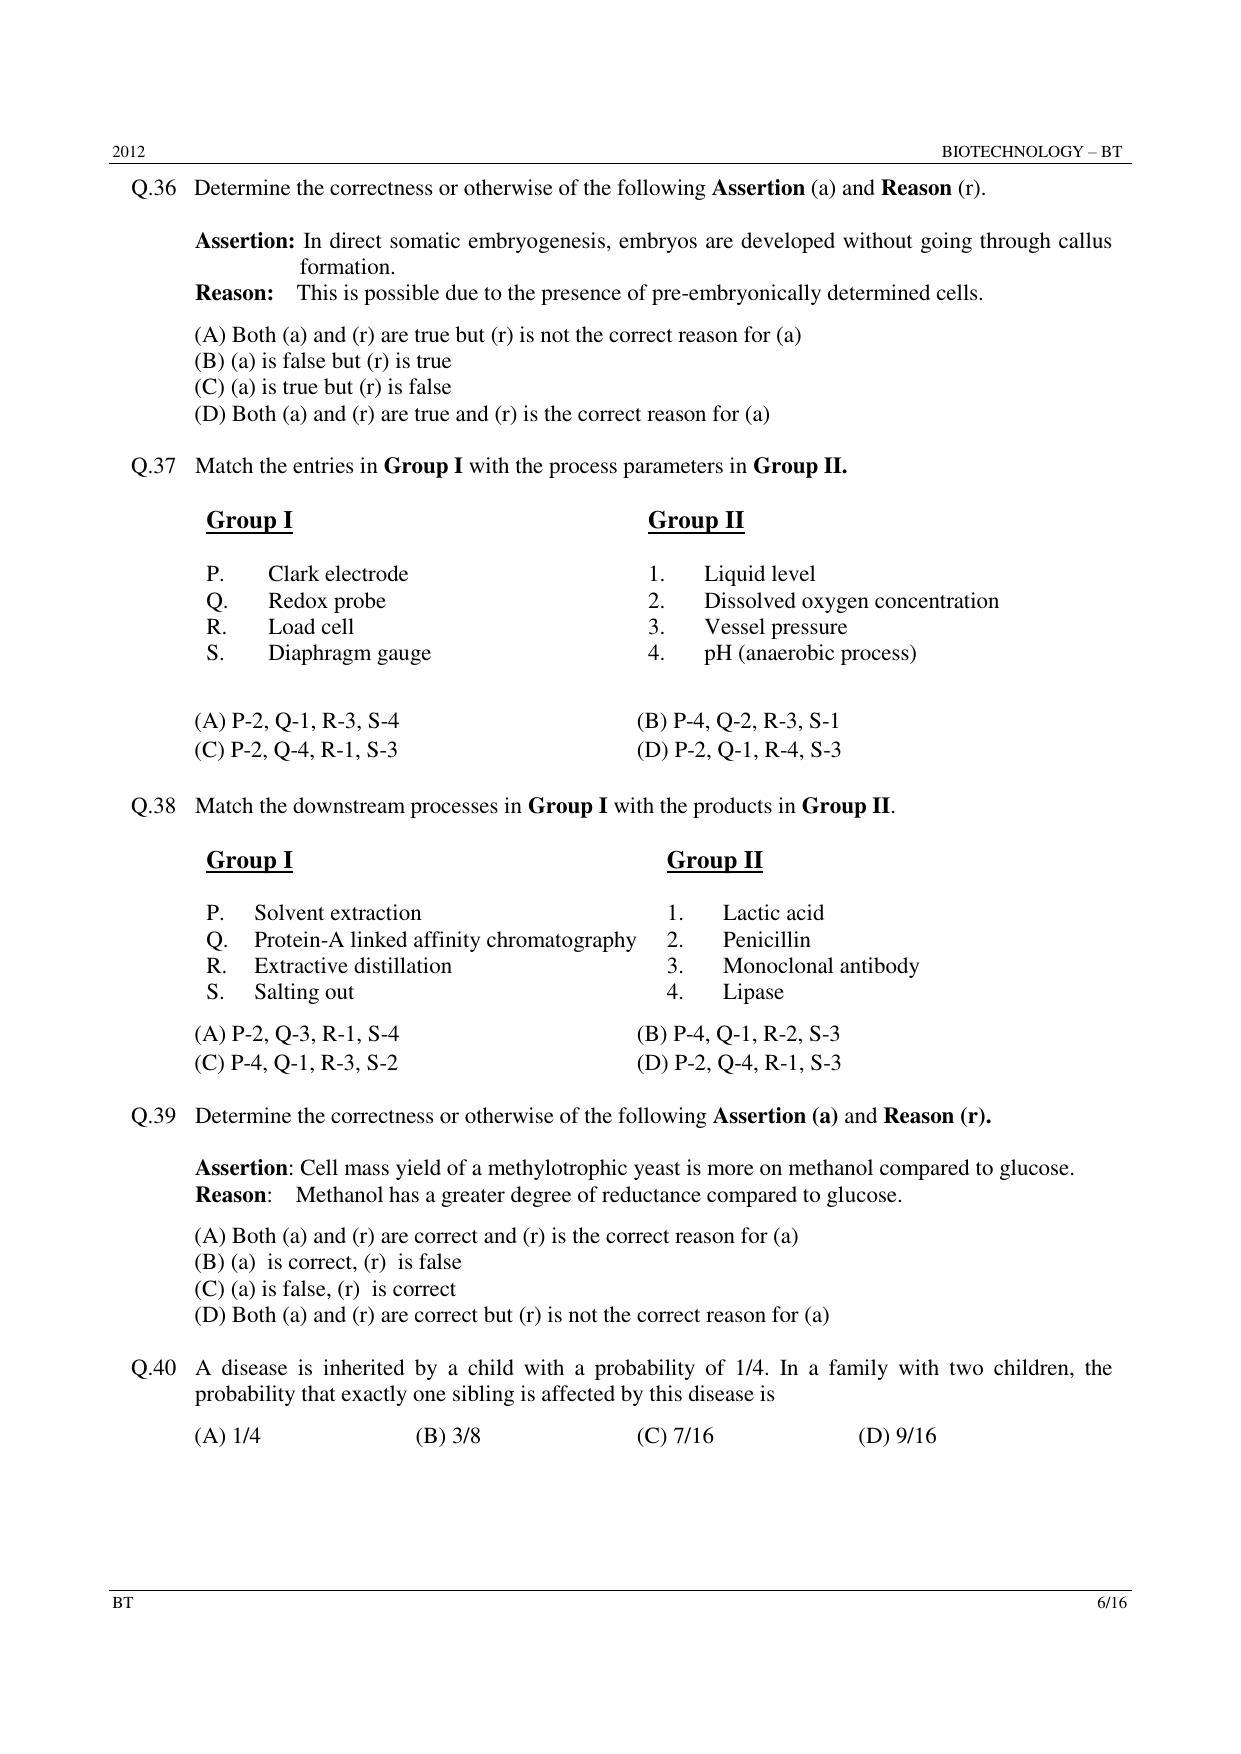 GATE 2012 Biotechnology (BT) Question Paper with Answer Key - Page 6